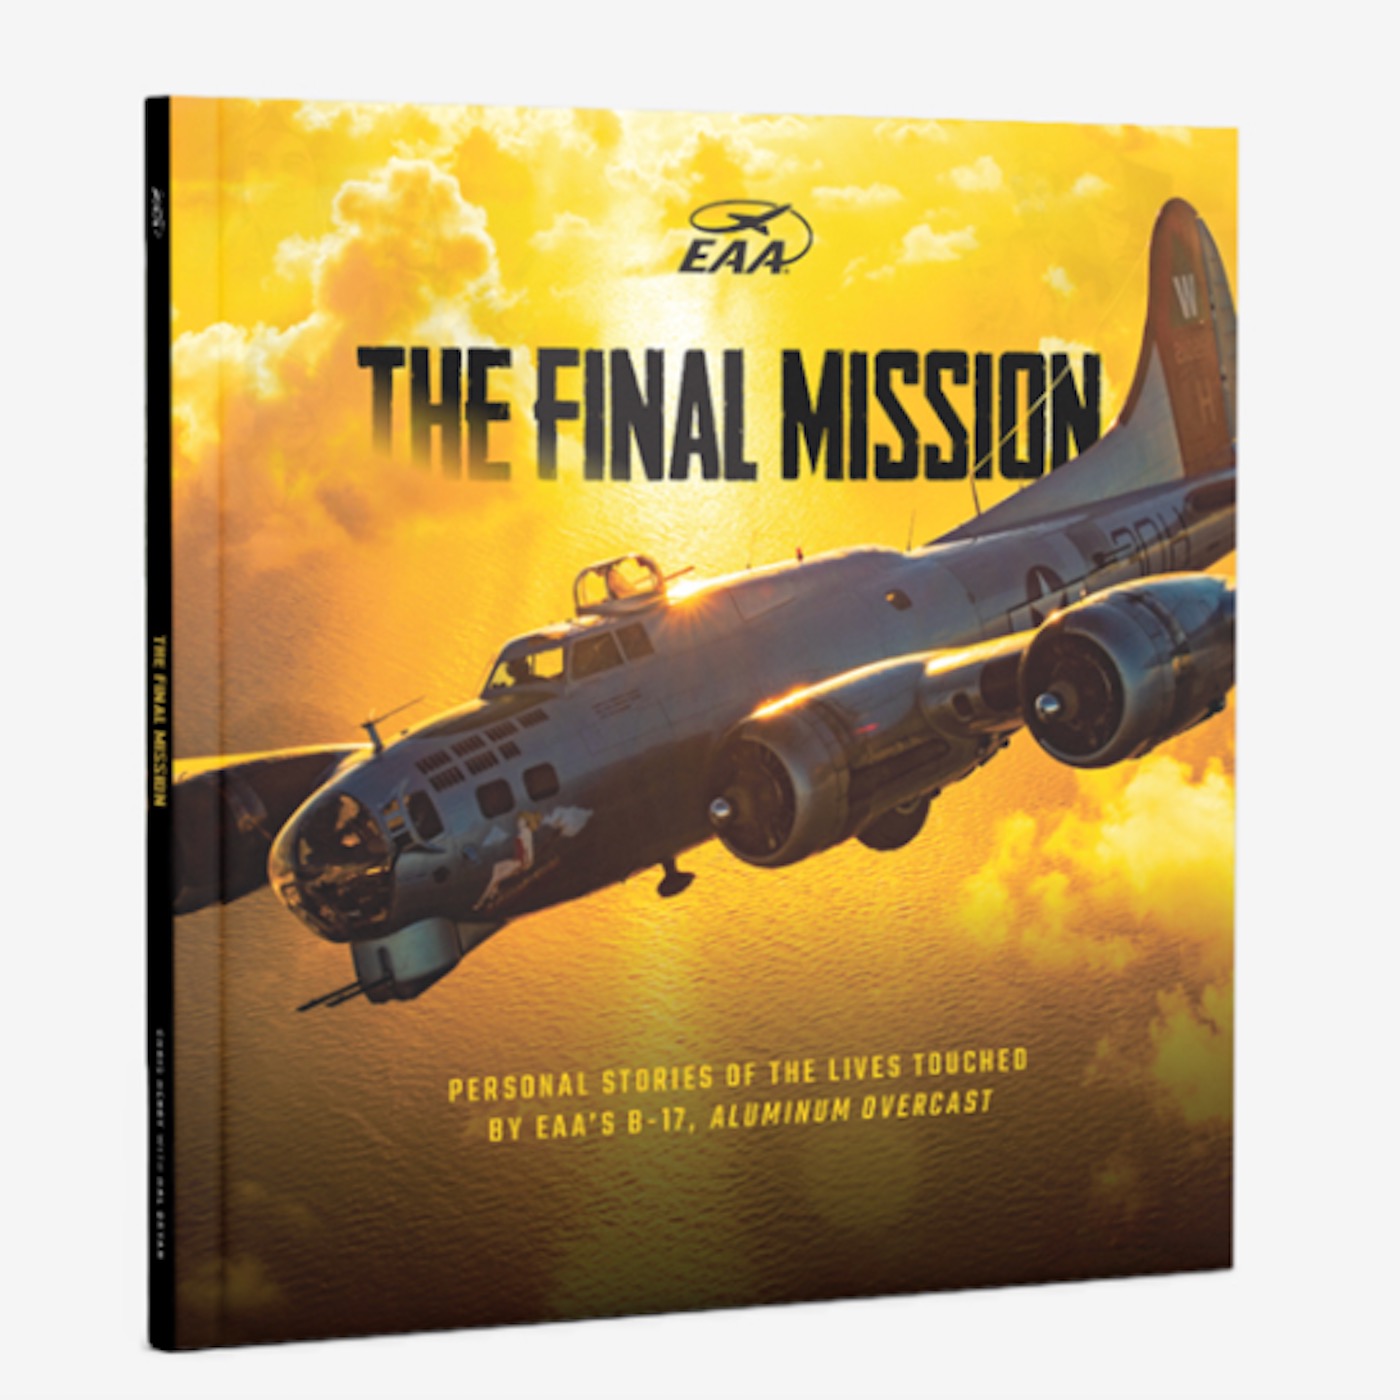 Warbird Radio - The Final Mission, Author & EAA Museum Director Chris Henry - Ep 661